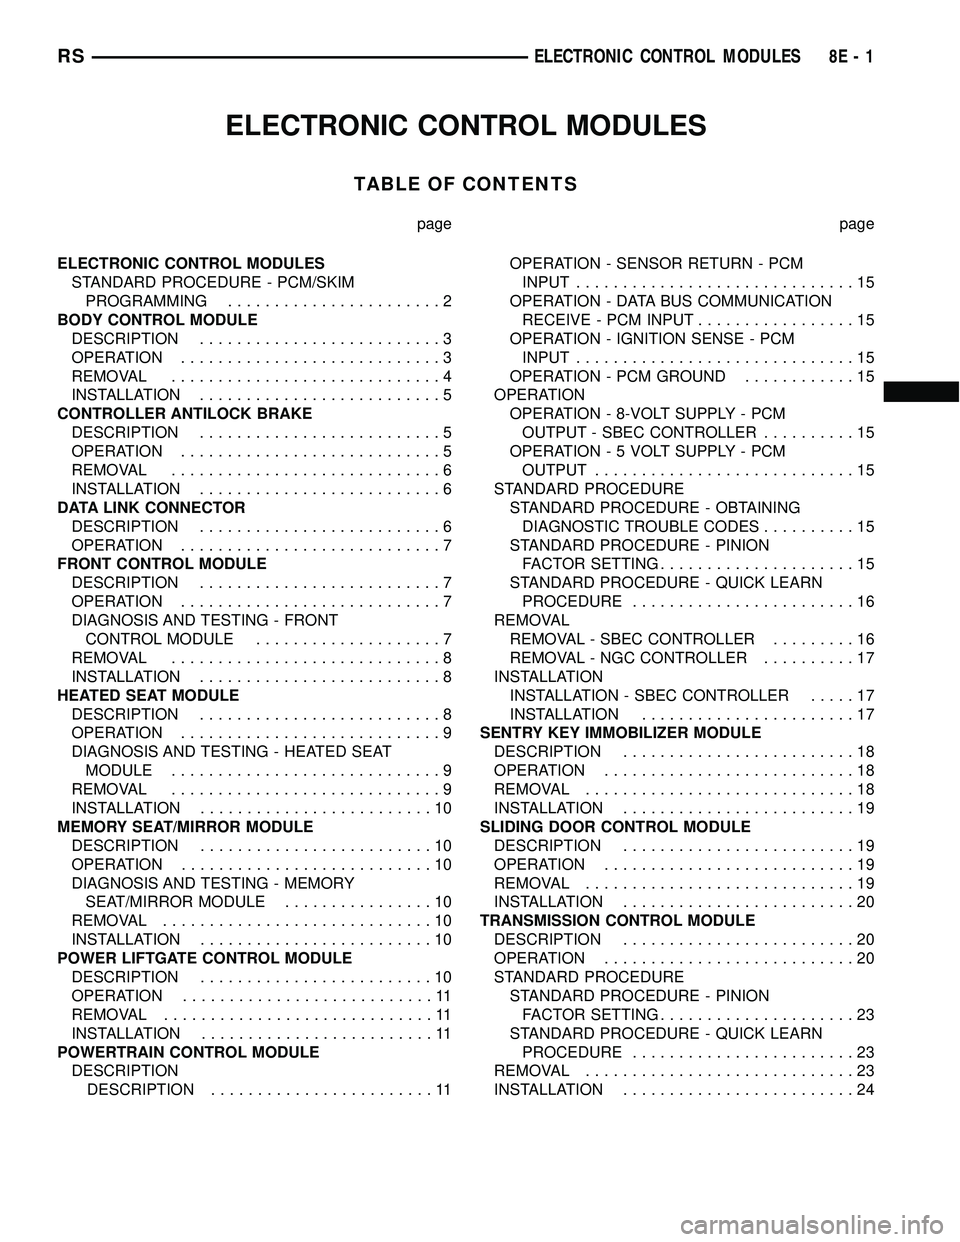 DODGE TOWN AND COUNTRY 2004  Service Manual ELECTRONIC CONTROL MODULES
TABLE OF CONTENTS
page page
ELECTRONIC CONTROL MODULES
STANDARD PROCEDURE - PCM/SKIM
PROGRAMMING.......................2
BODY CONTROL MODULE
DESCRIPTION.....................